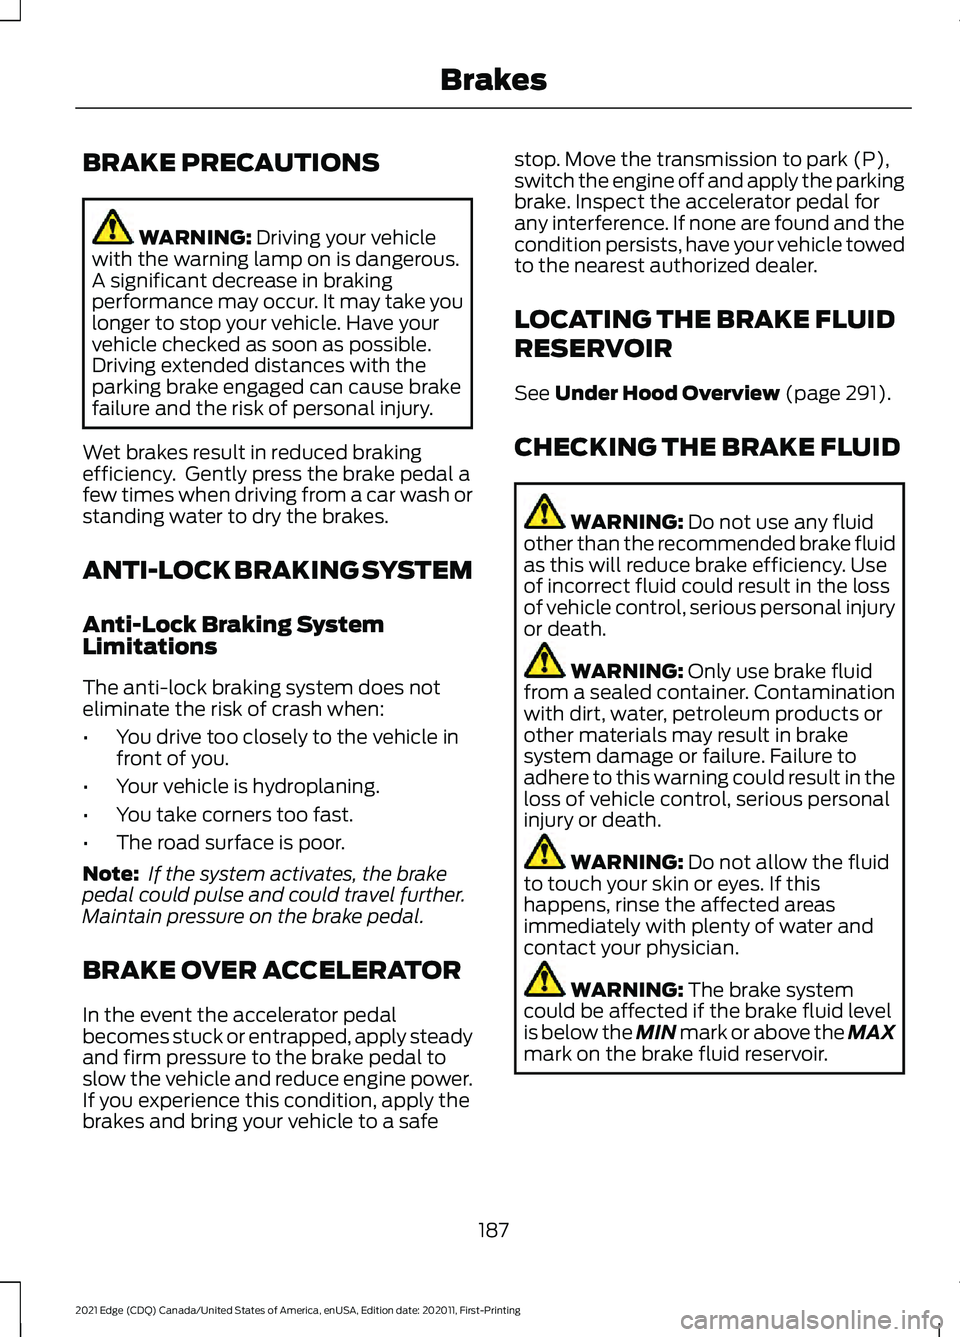 FORD EDGE 2021  Owners Manual BRAKE PRECAUTIONS
WARNING: Driving your vehicle
with the warning lamp on is dangerous.
A significant decrease in braking
performance may occur. It may take you
longer to stop your vehicle. Have your
v